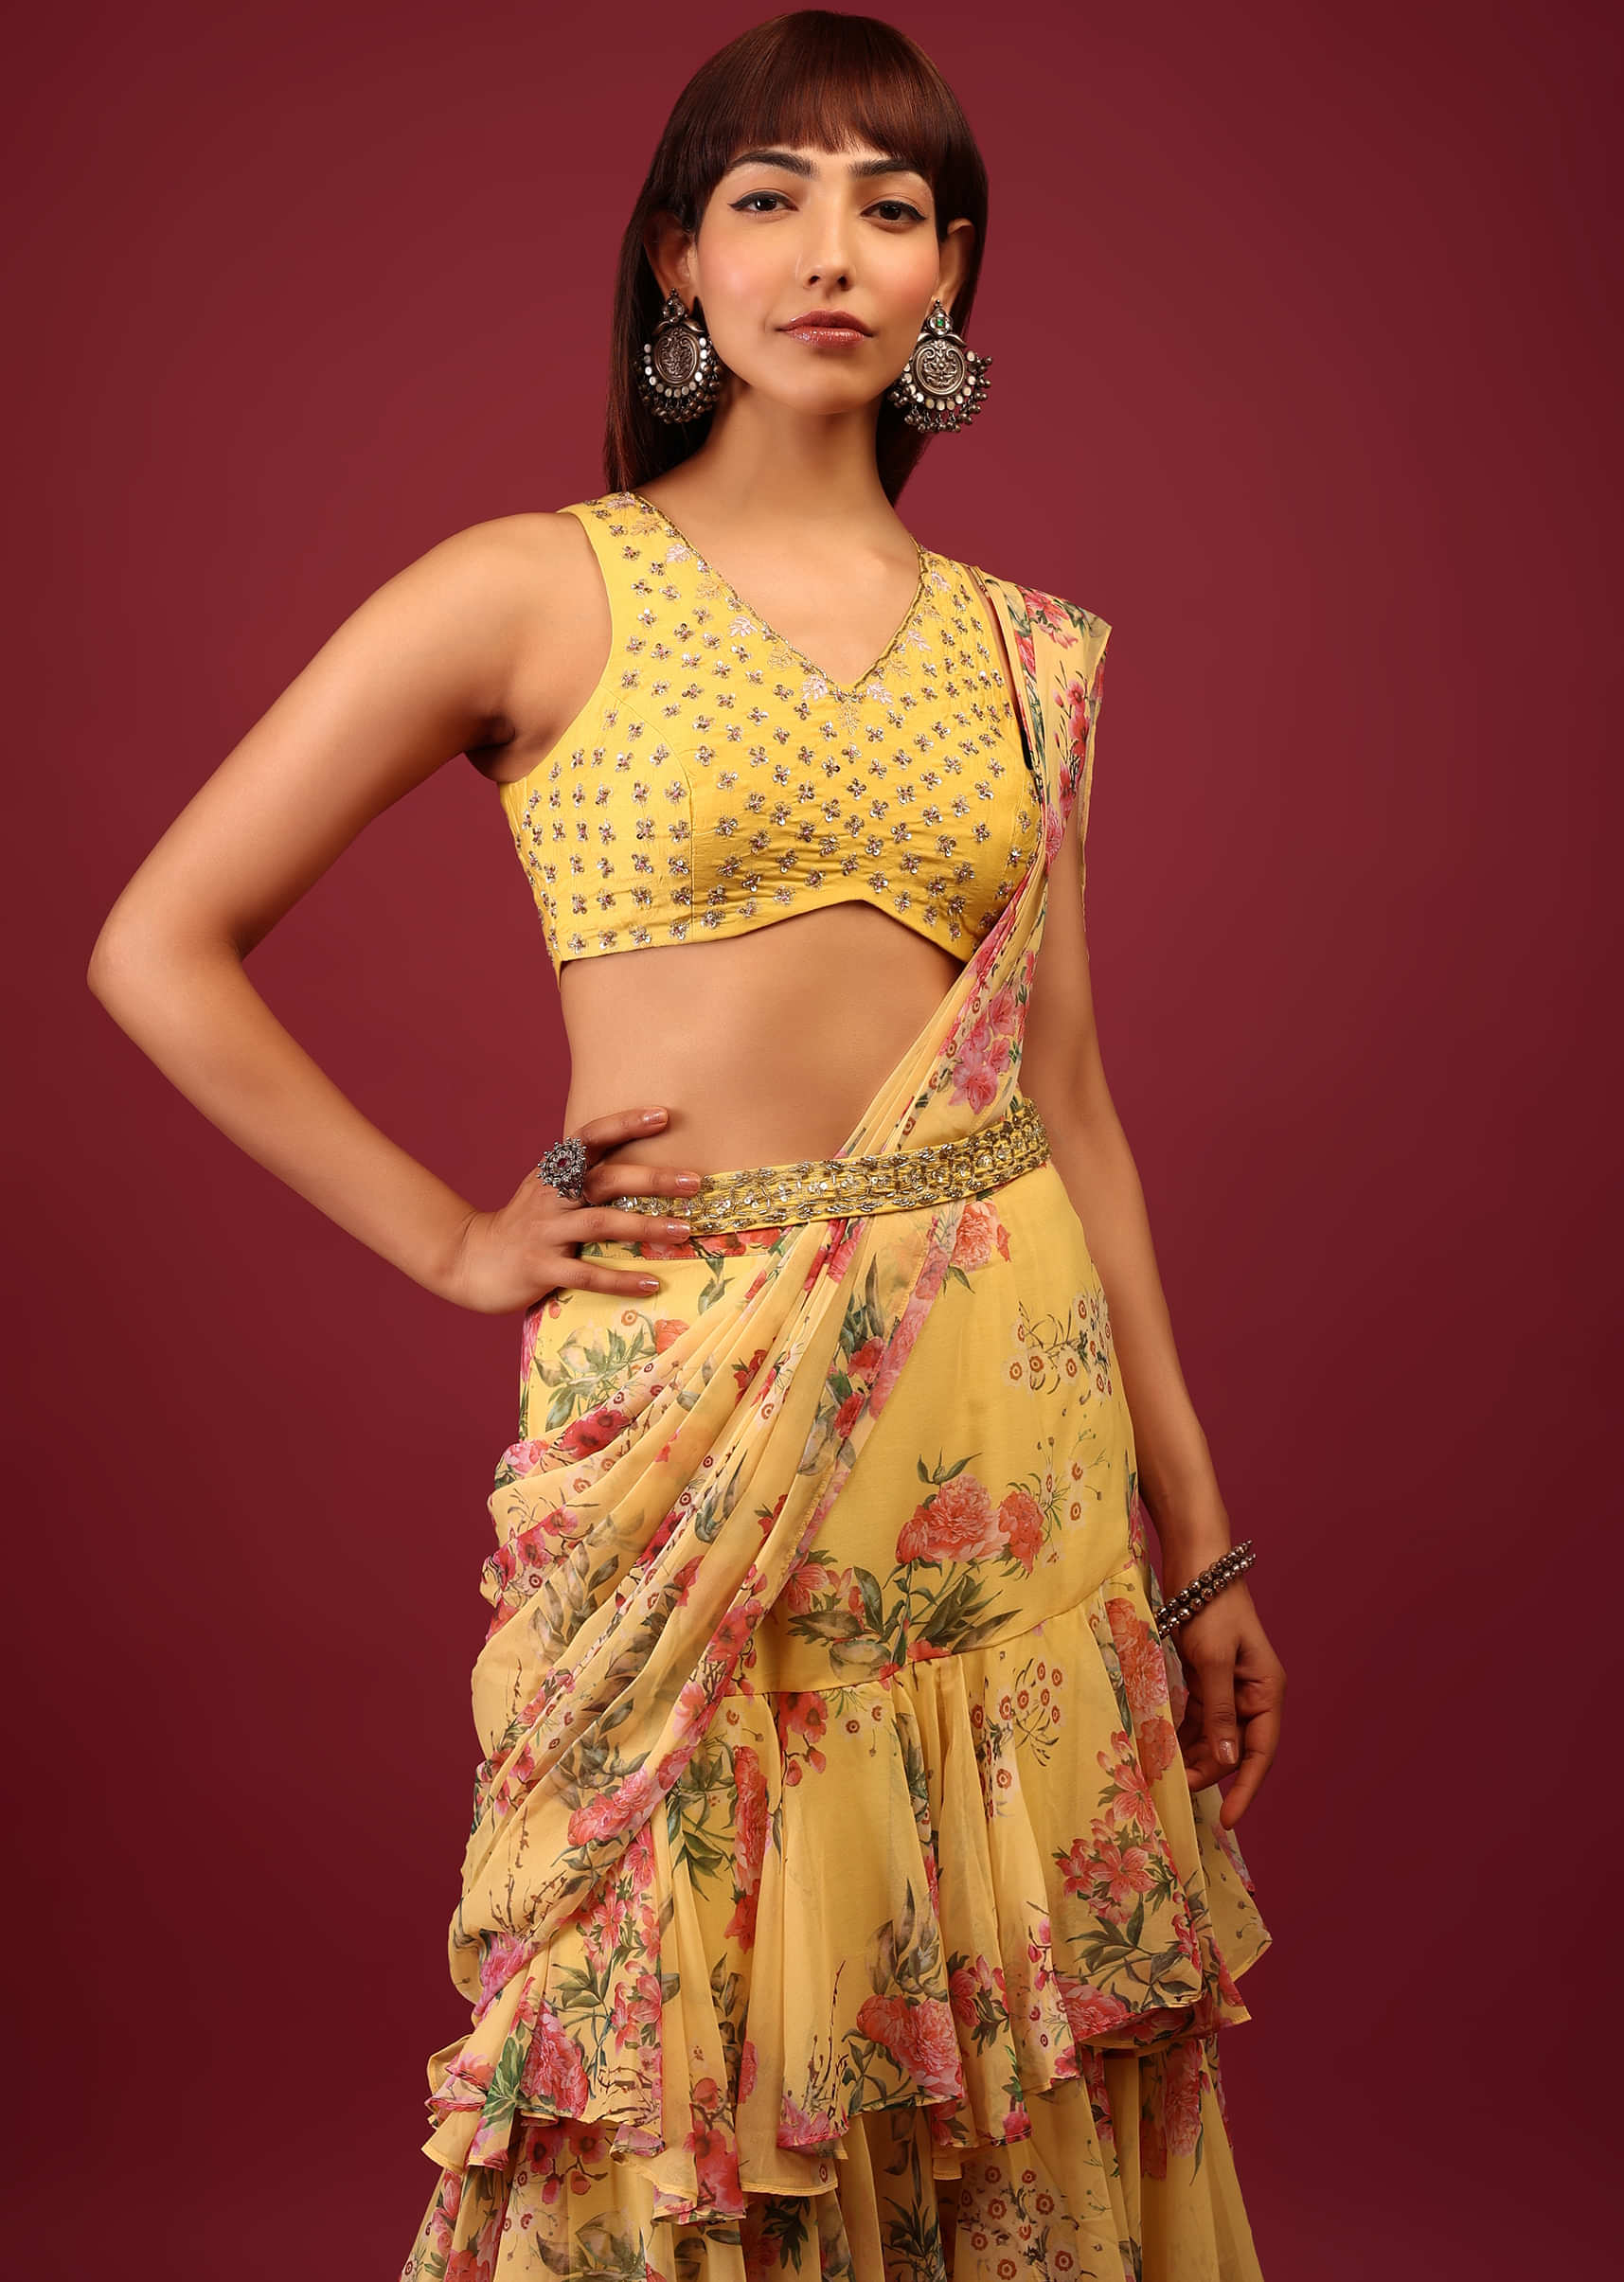 Mustard Yellow Floral Print Pleated Lehenga Saree In Layered Frill Pattern With An Embellished Blouse